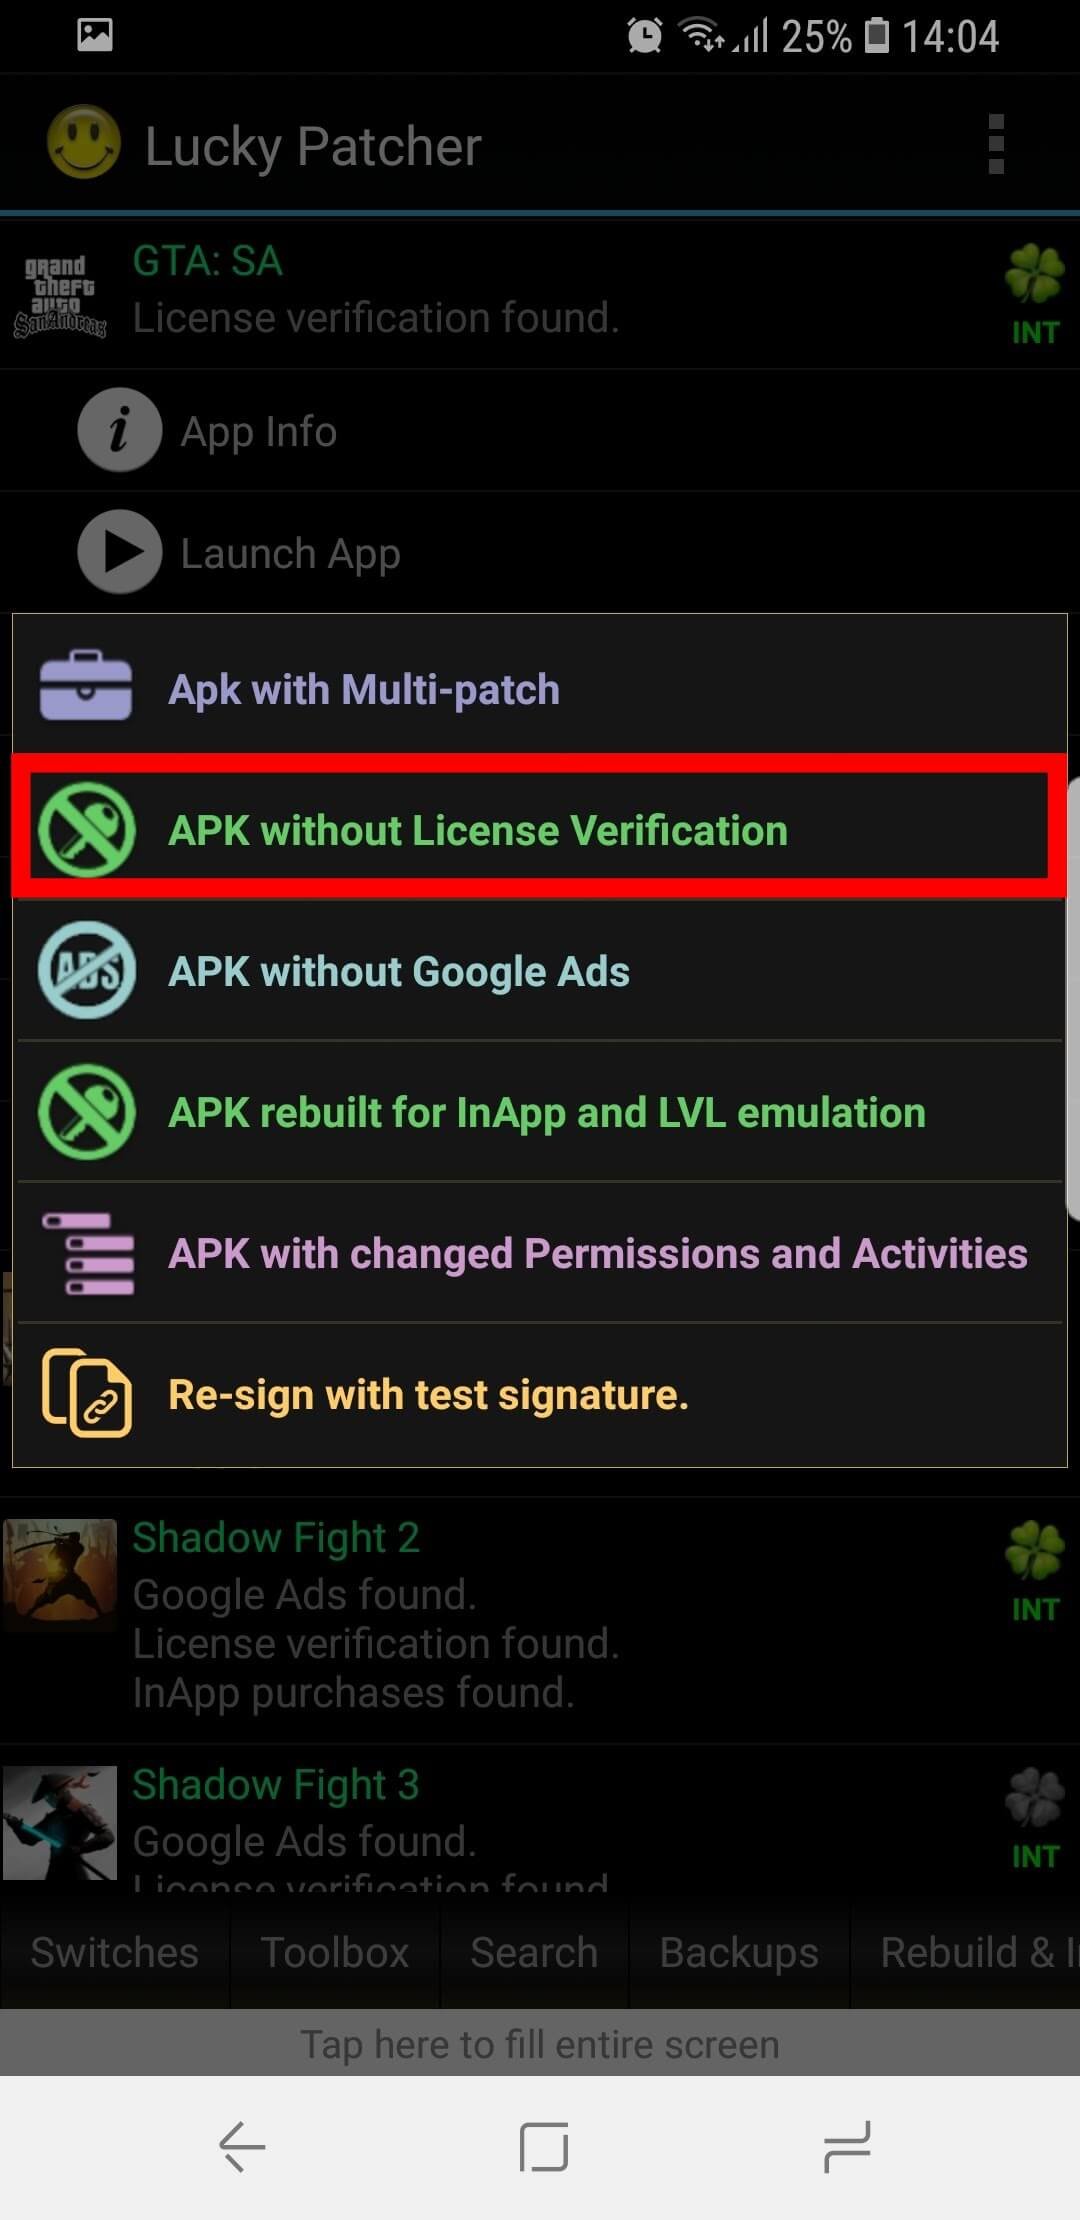 apk without license